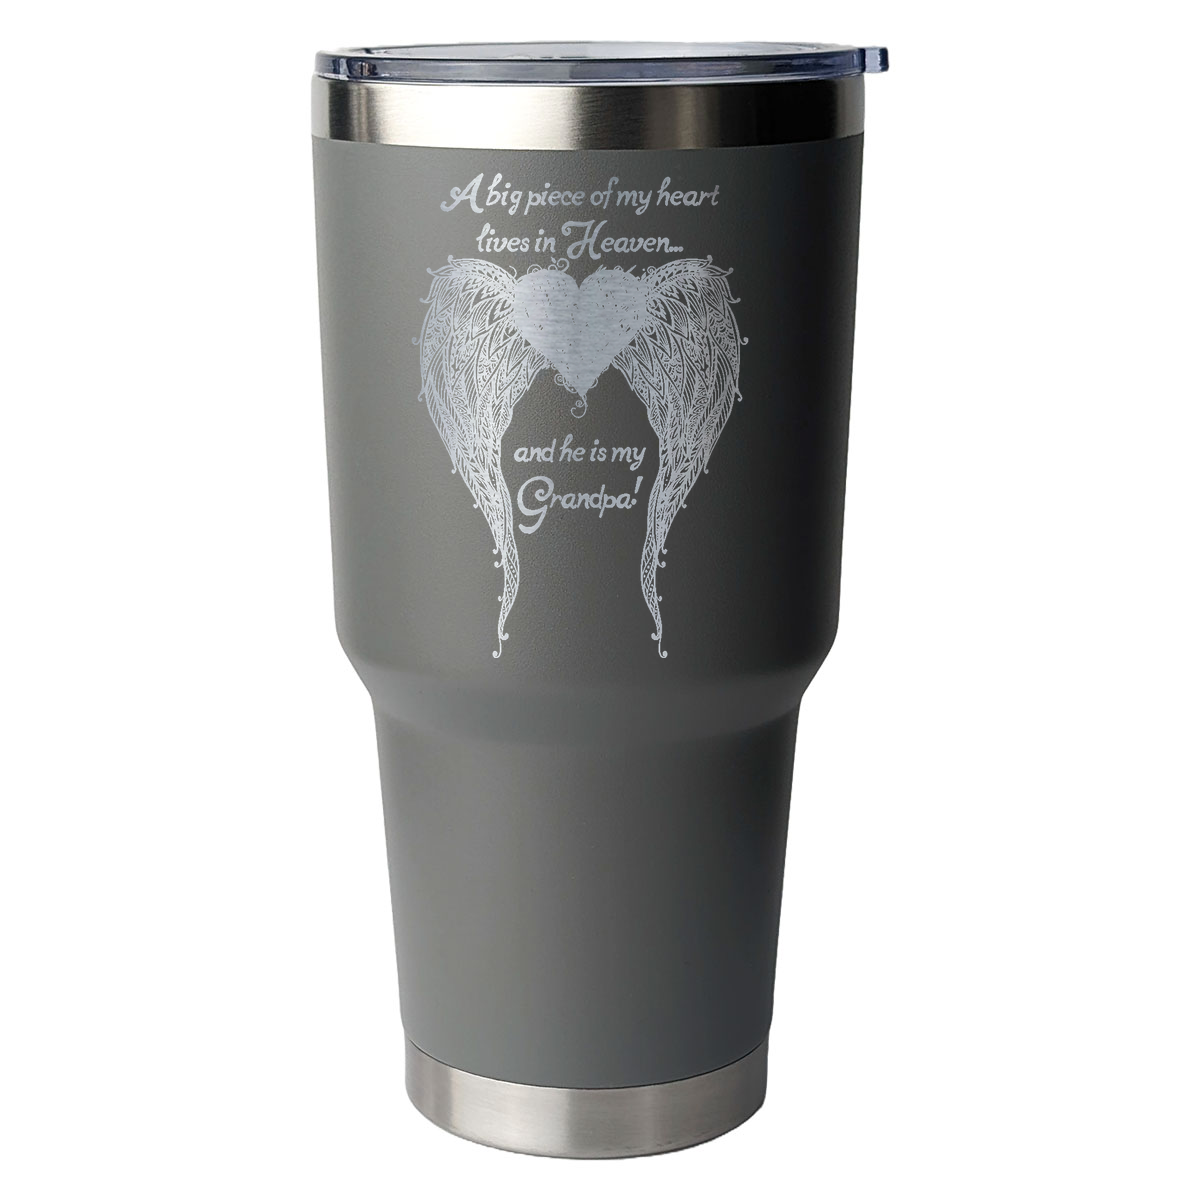 Grandpa - A Big Piece of my Heart 30 Ounce Laser Etched Tumbler Grey